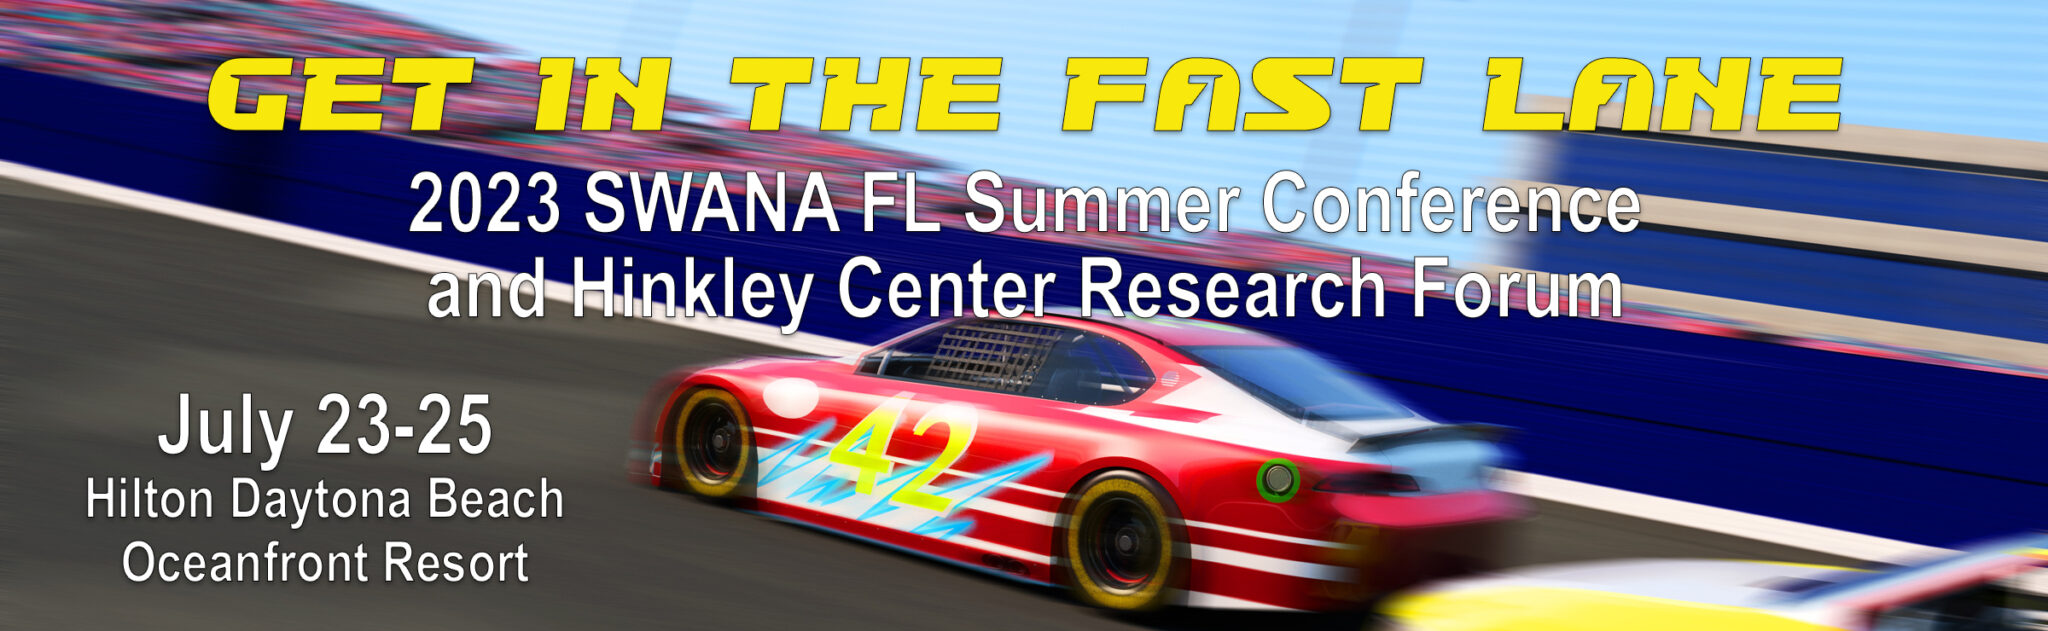 2023 SWANA FL Summer Conference and Hinkley Center Research Forum